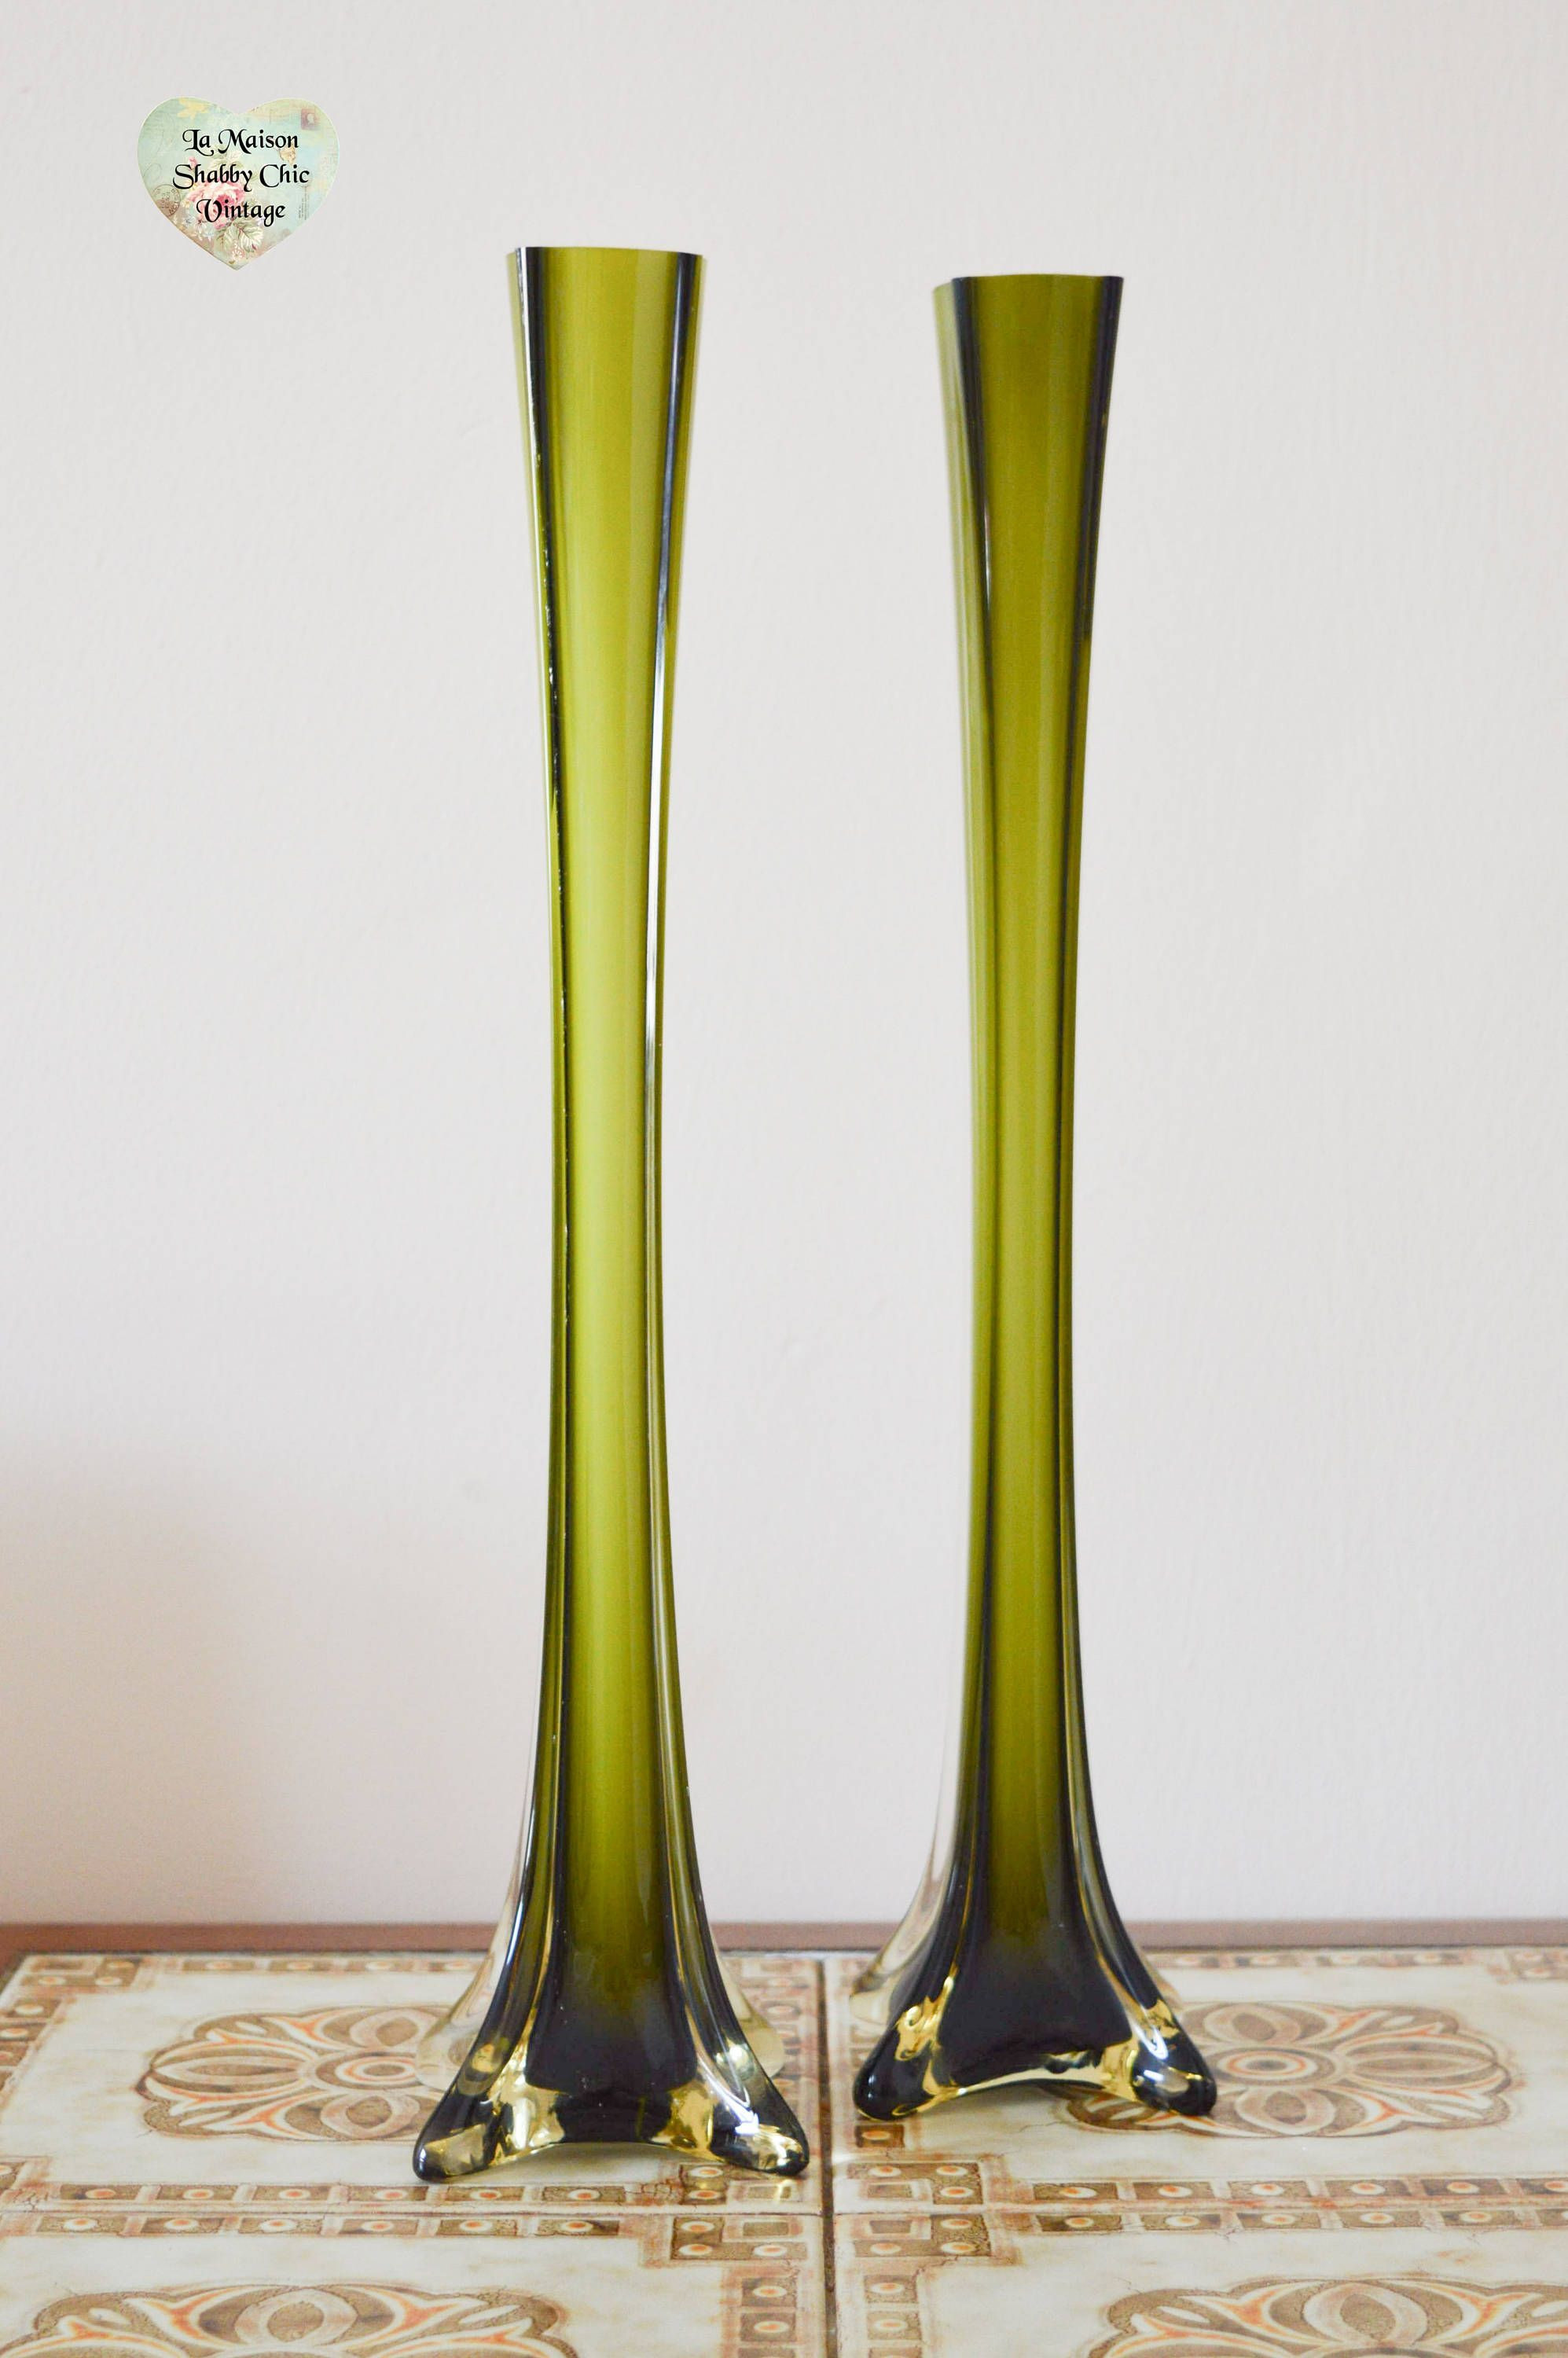 19 Best 5 Inch Square Glass Vases 2024 free download 5 inch square glass vases of 35 antique green glass vases the weekly world with regard to retro skinny glass vases pair 2 shades of green retro flower vases